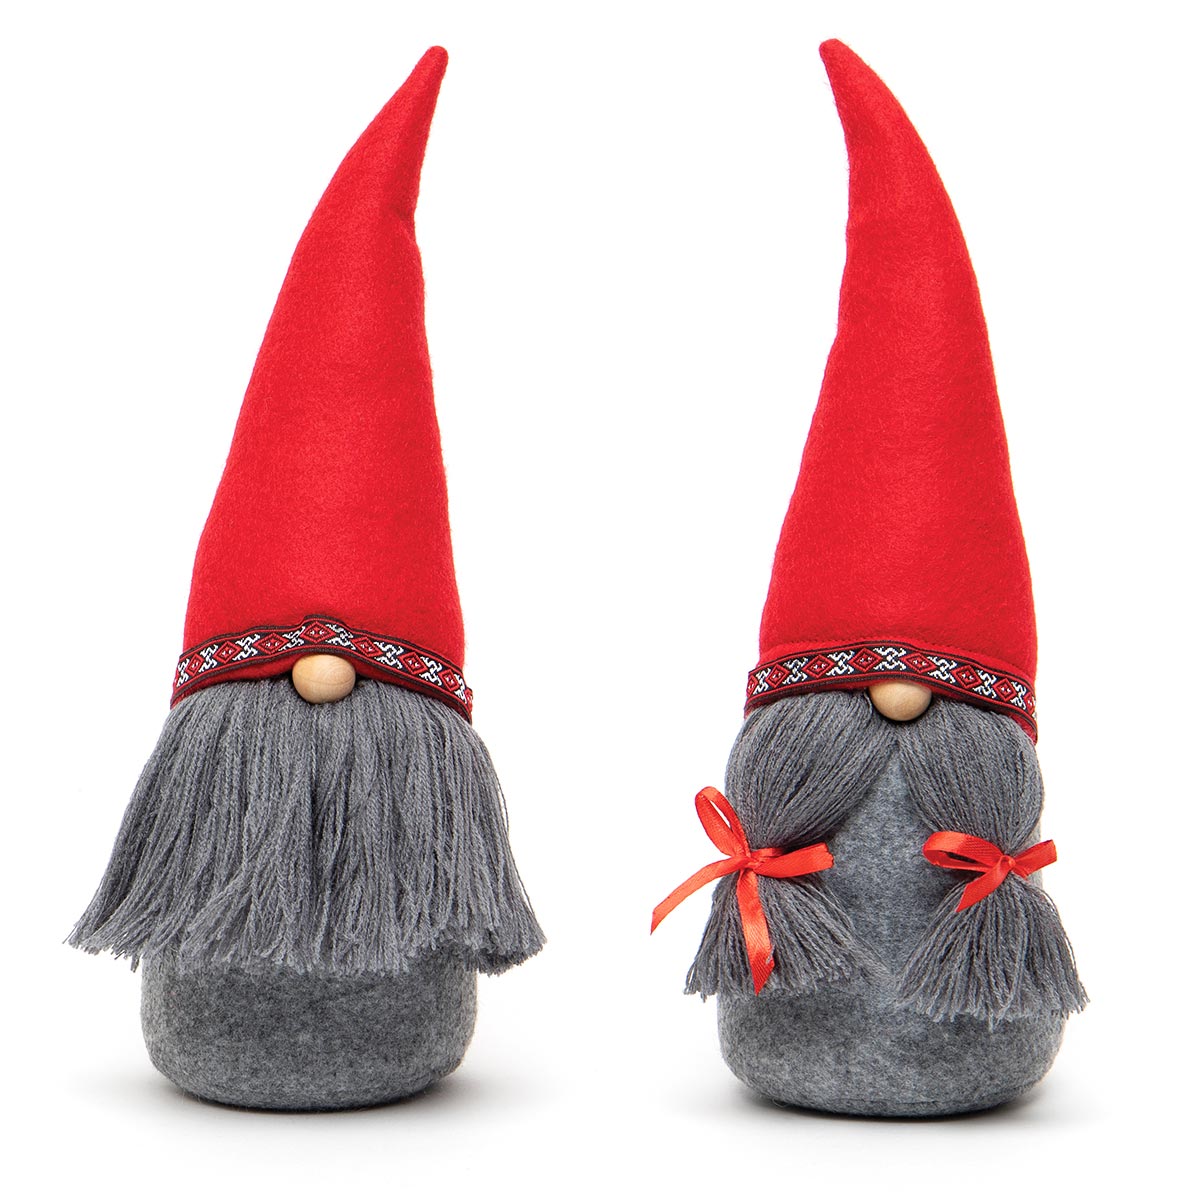 FRITZ AND FREDA GNOME RED/GREY WITH HAT, WOOD NOSE AND